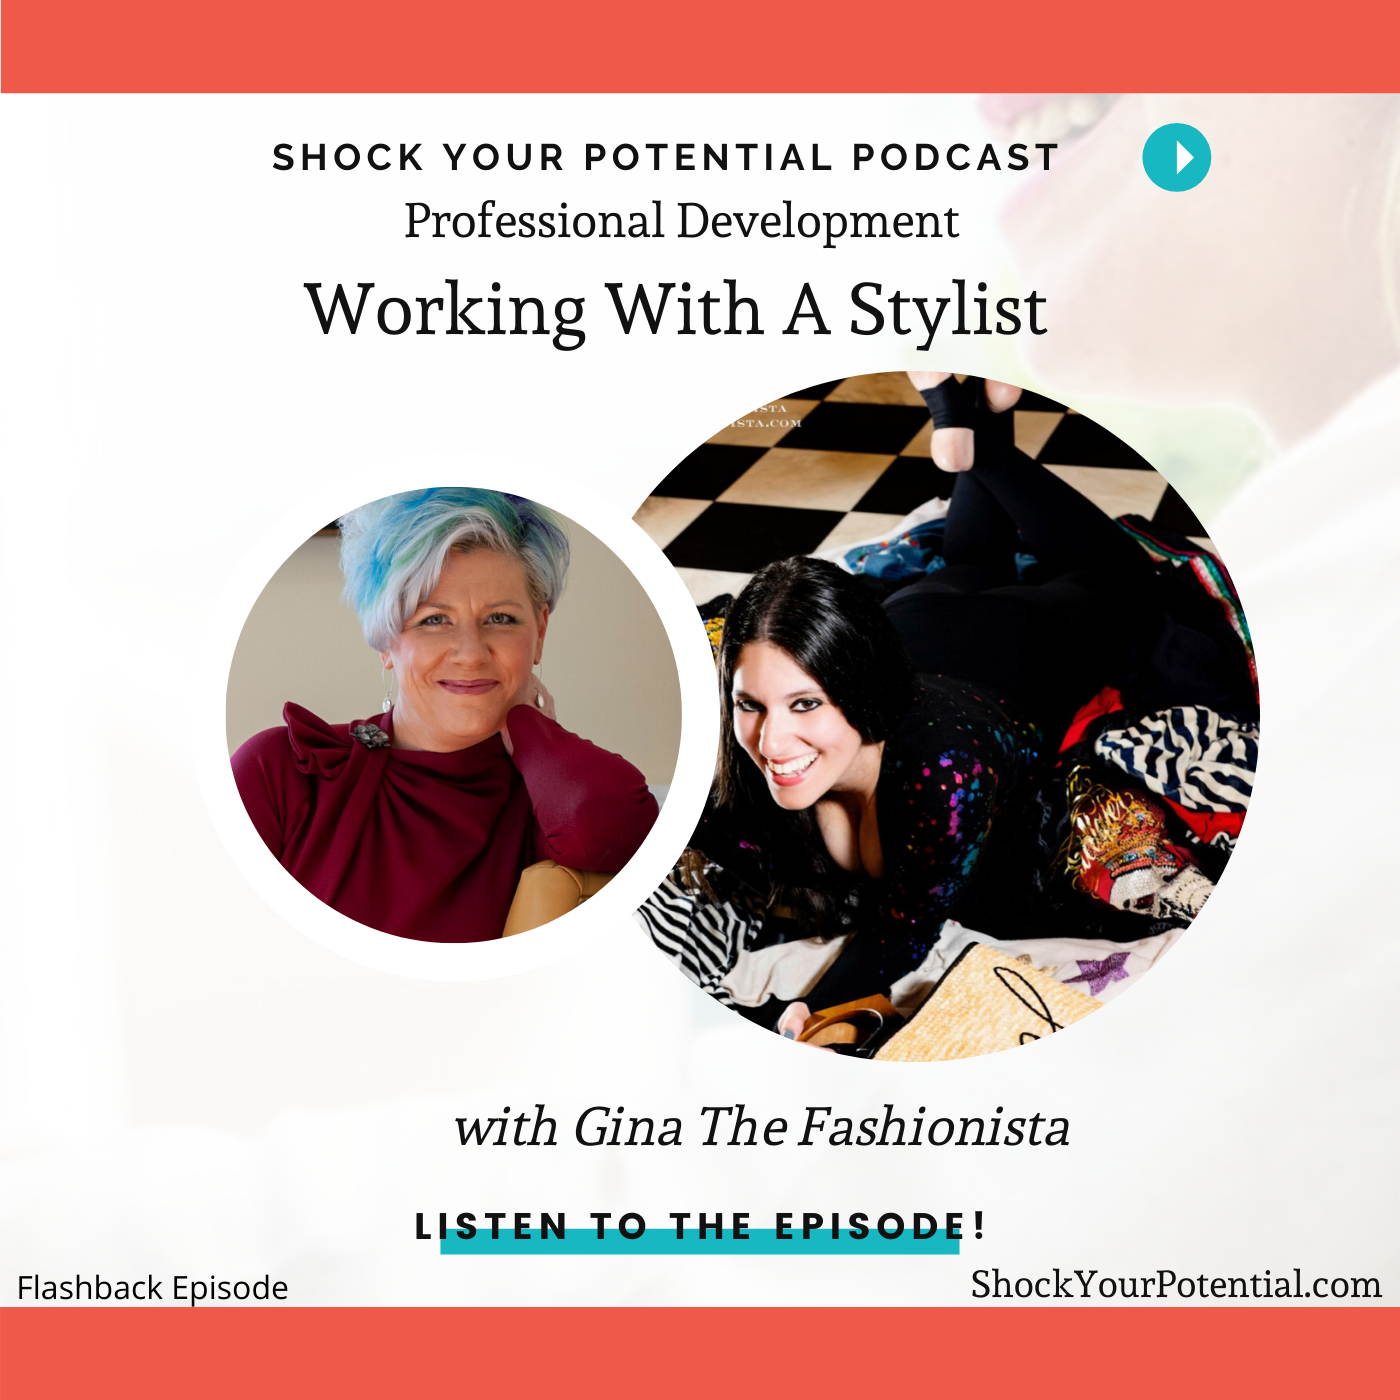 Working with a Stylist – Gina